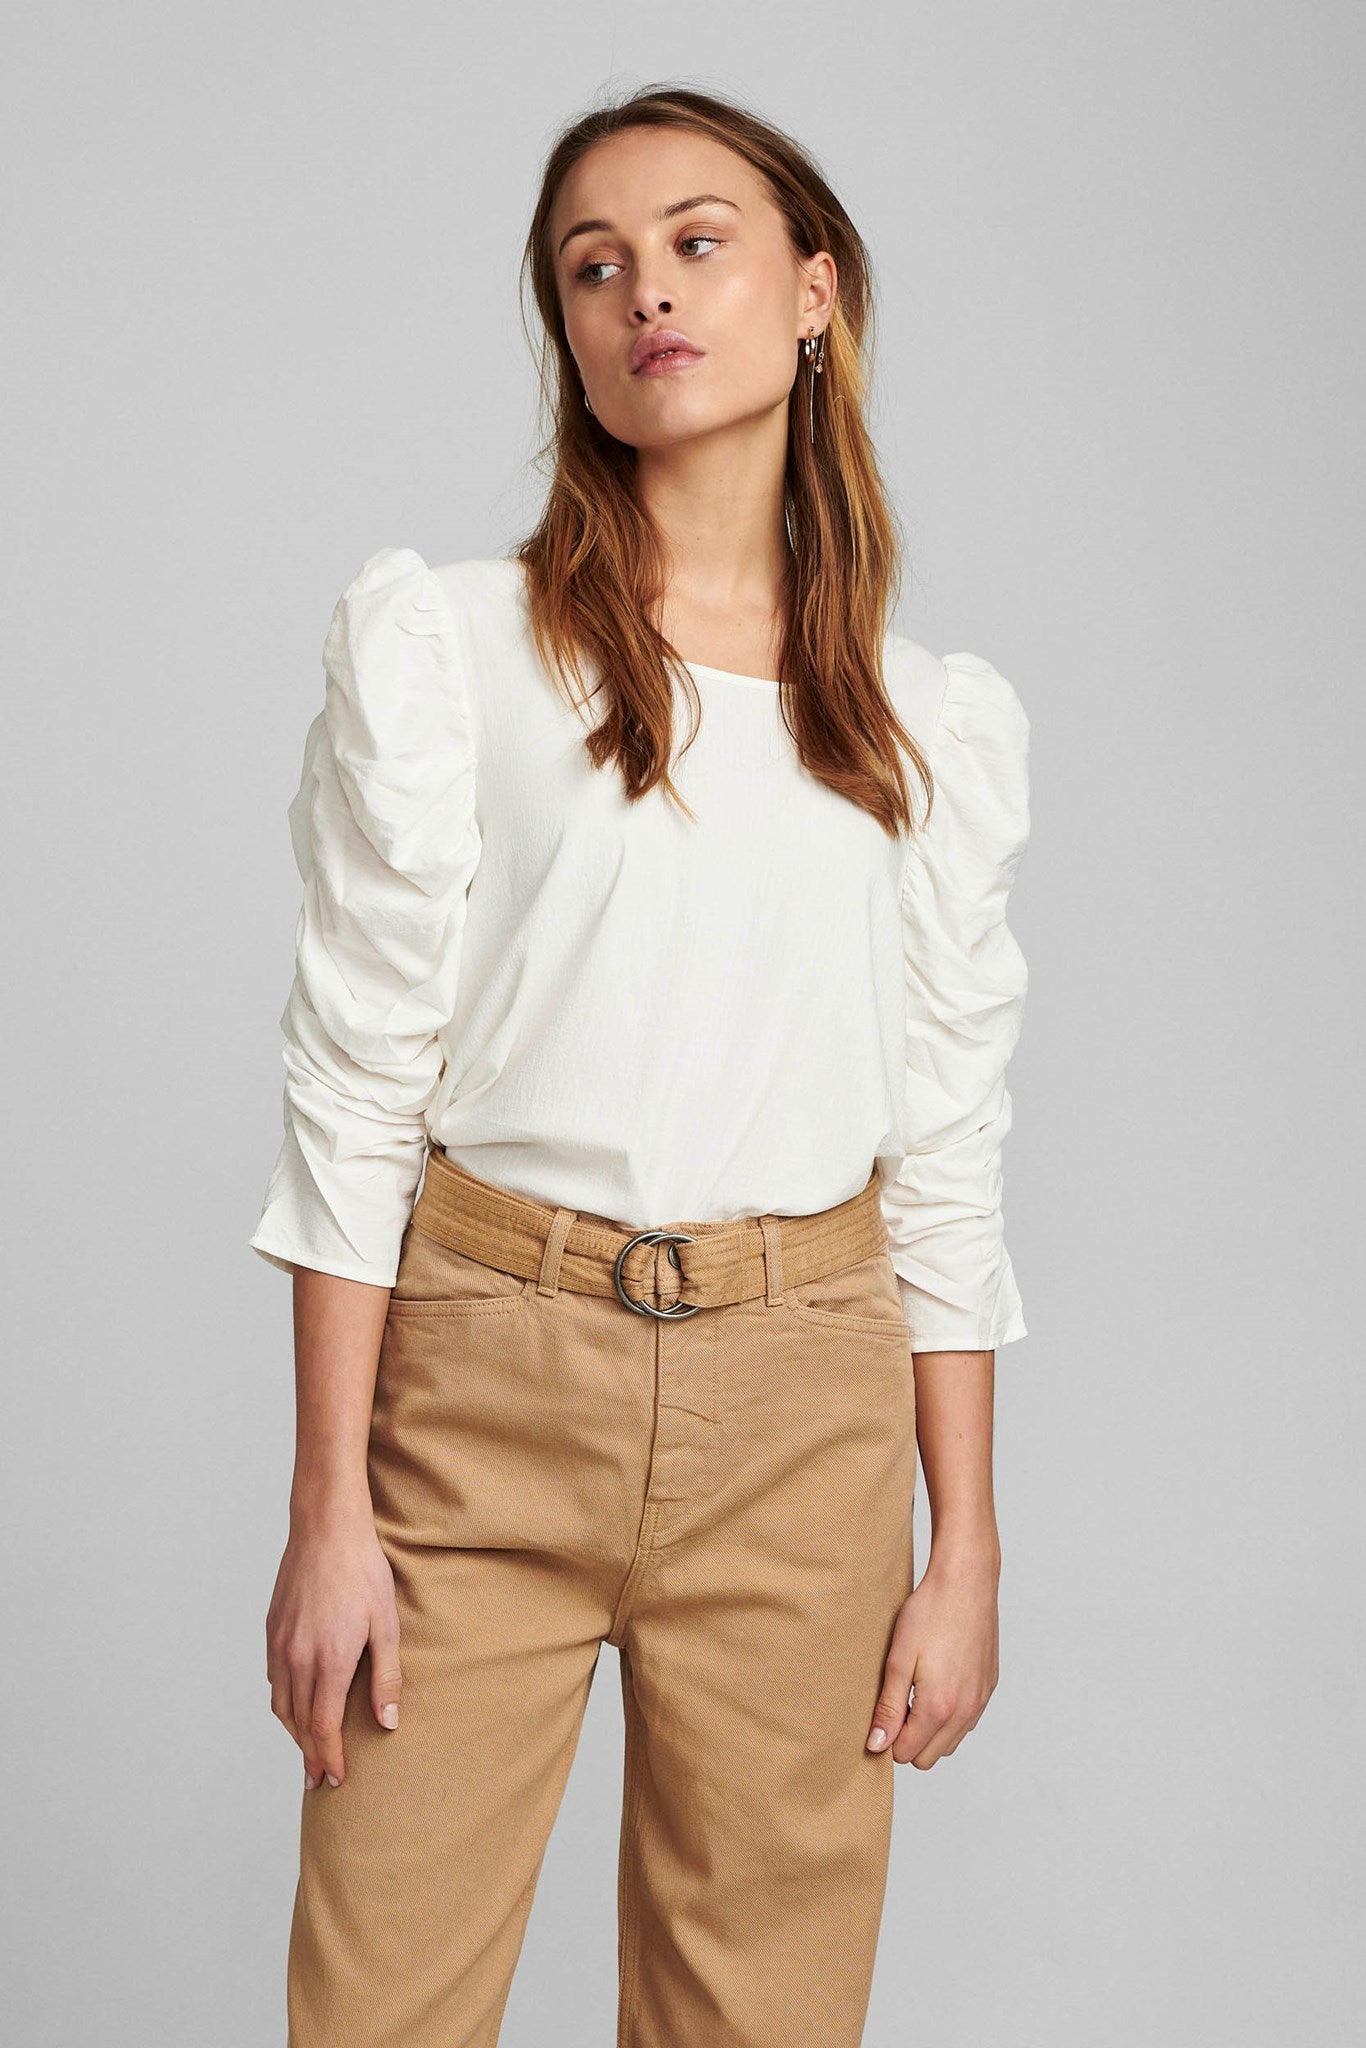 PRE-OWNED NUFIONA BLOUSE - Bright White